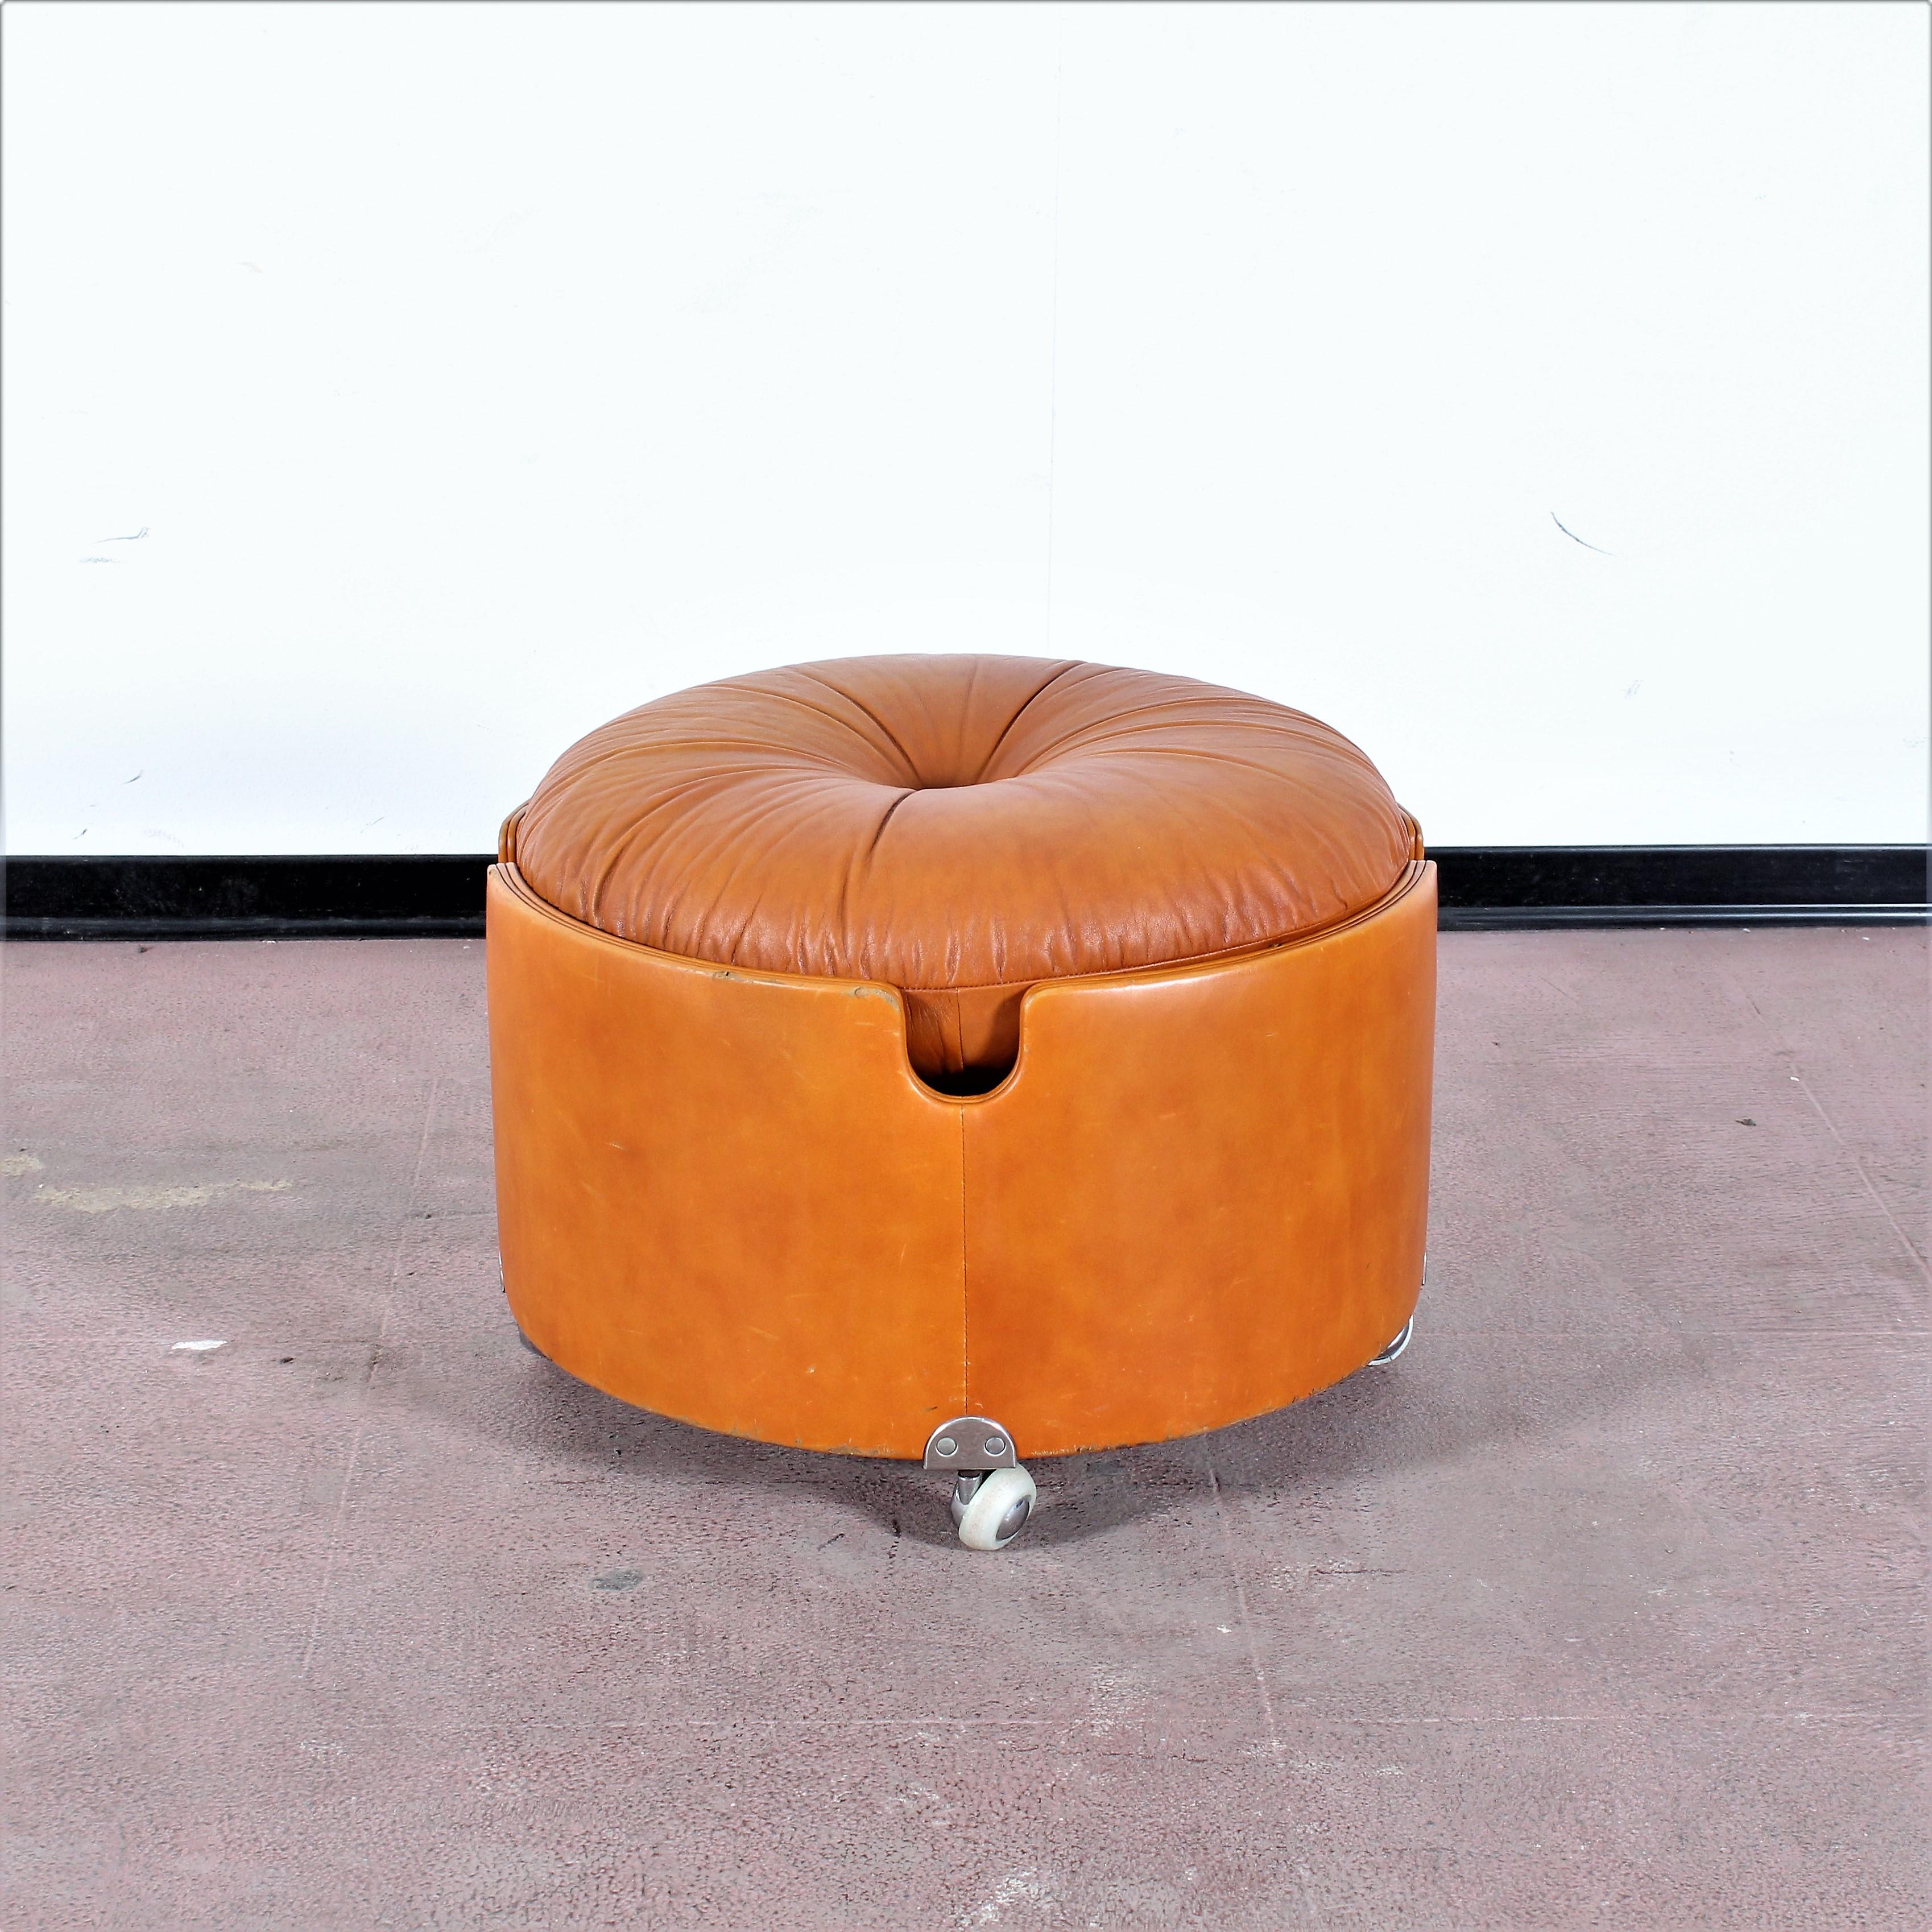 Beautiful leather ottoman designed by Luigi Massoni for Poltrona Frau in the 1960s. A soft cushion, wheels to facilitate movement, rust-colored leather upholstery, brand label on the bottom.
There are signs of use and some imperfections in the